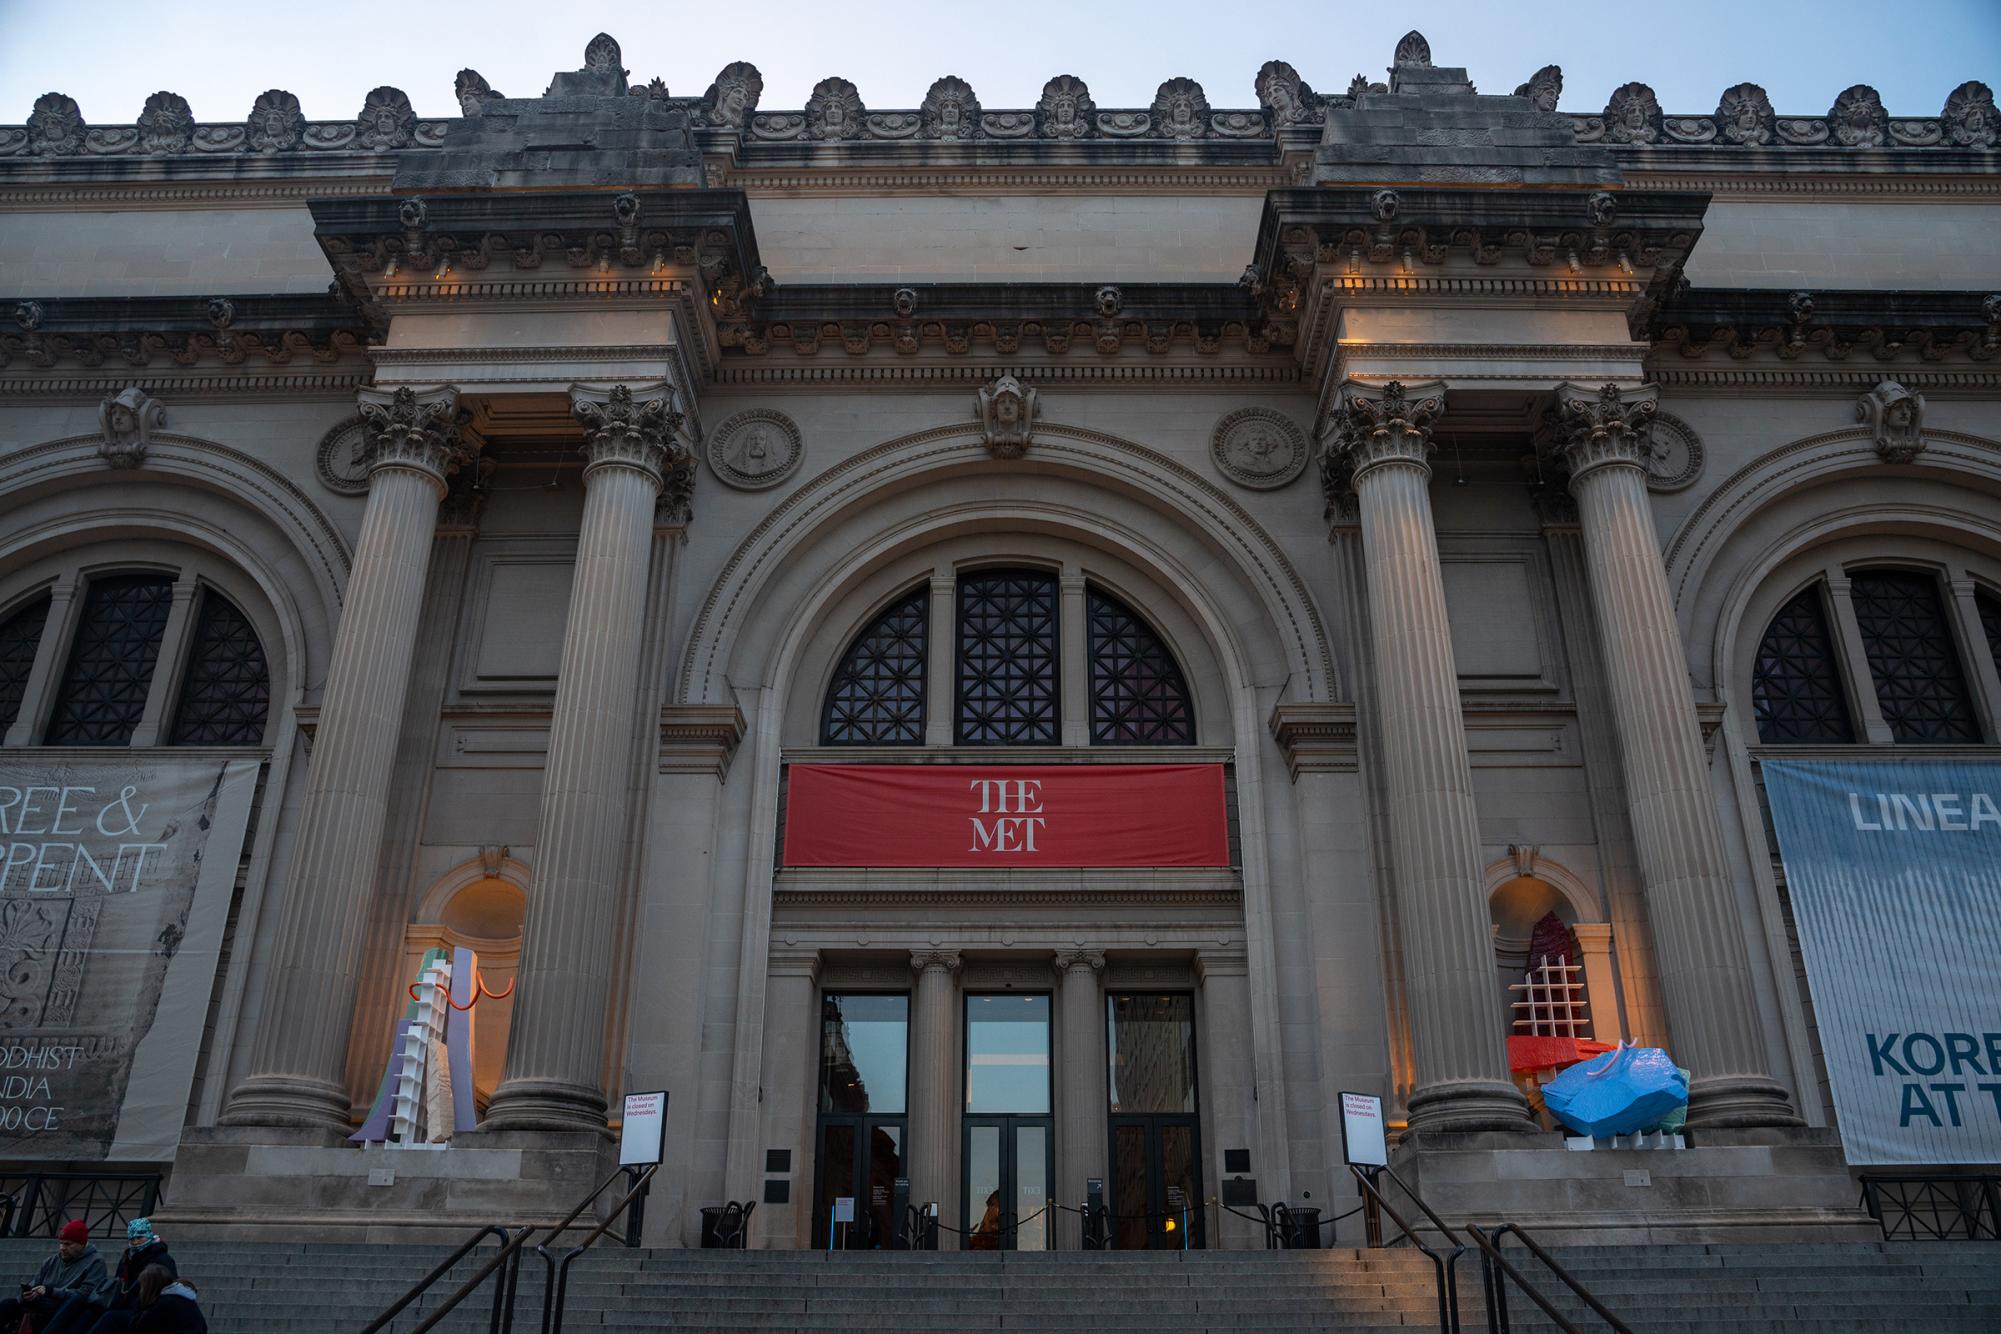 The facade of The Metropolitan Museum of Art featuring a red banner which reads “THE MET.”